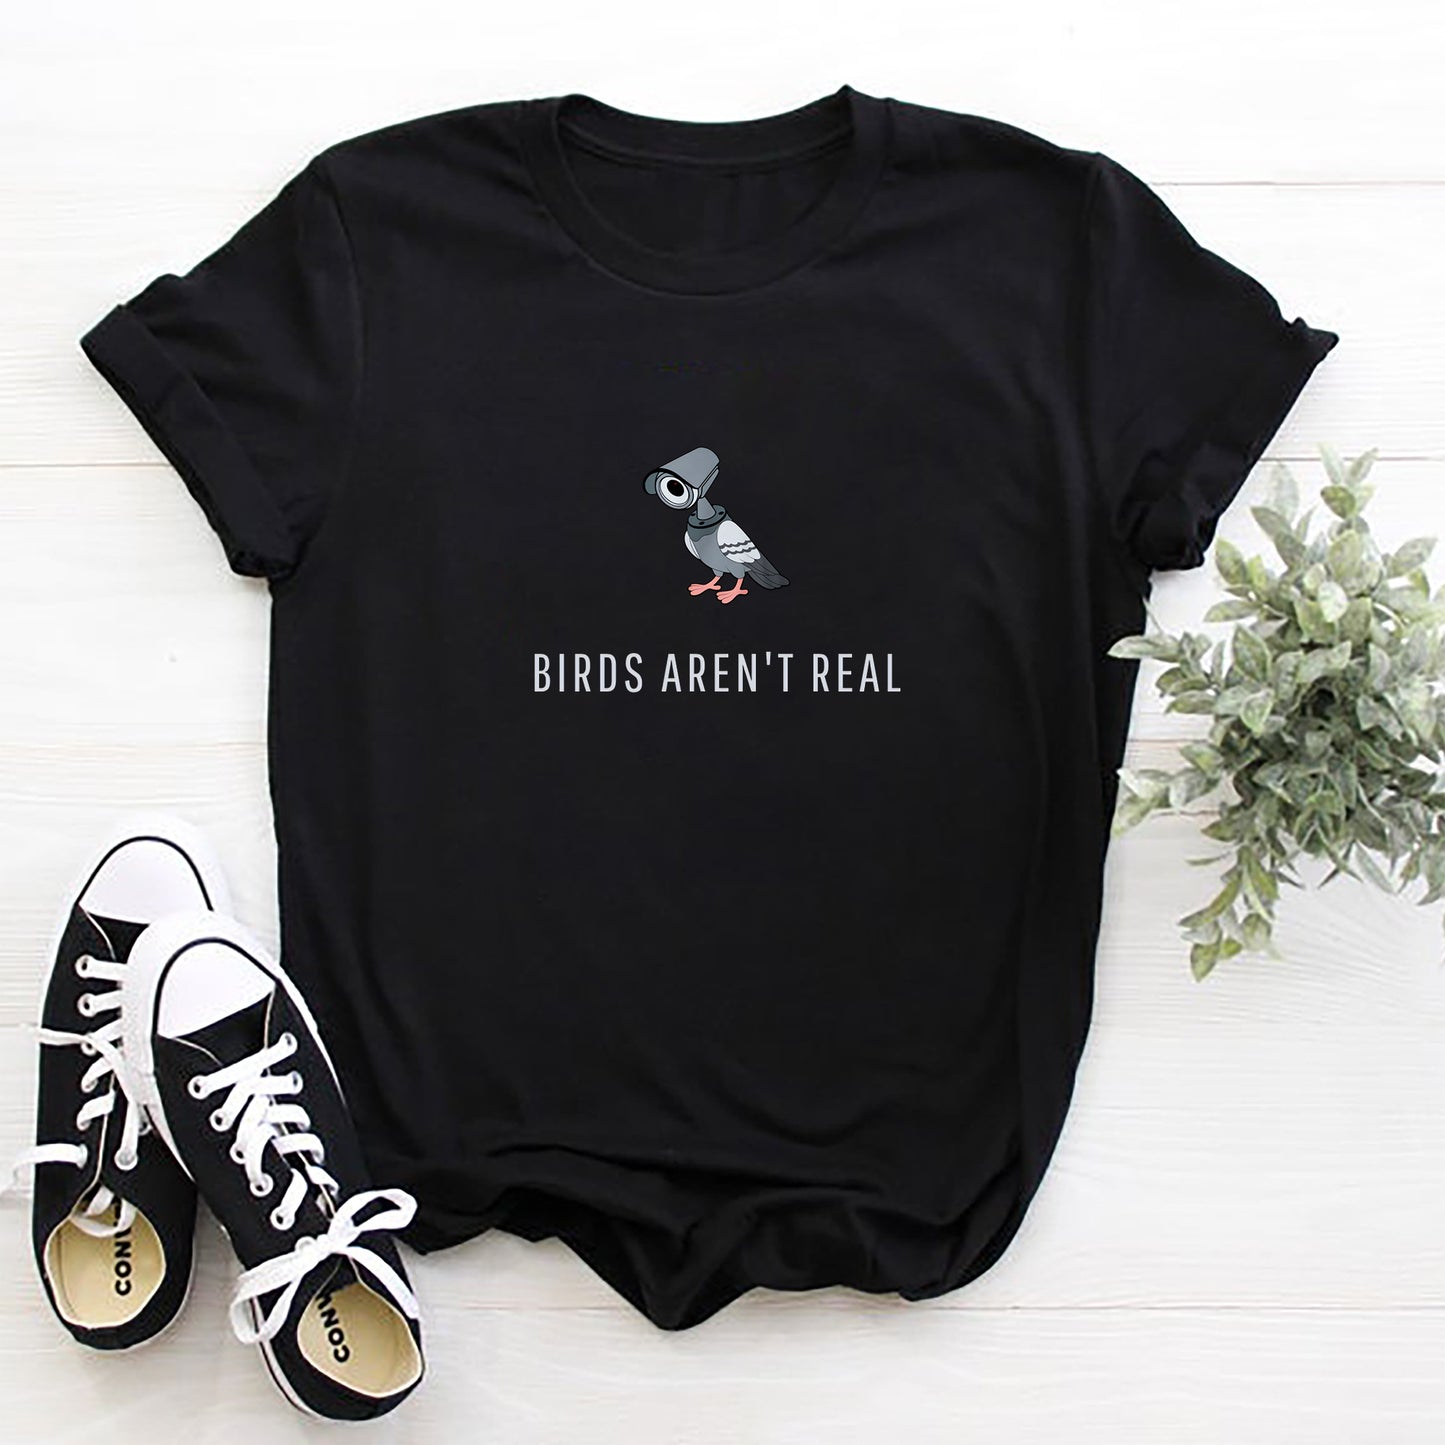 Birds Arent Real Shirt, Gifts For Adults Shirt, Gift For Girl Shirt, Personalized Gift Shirt